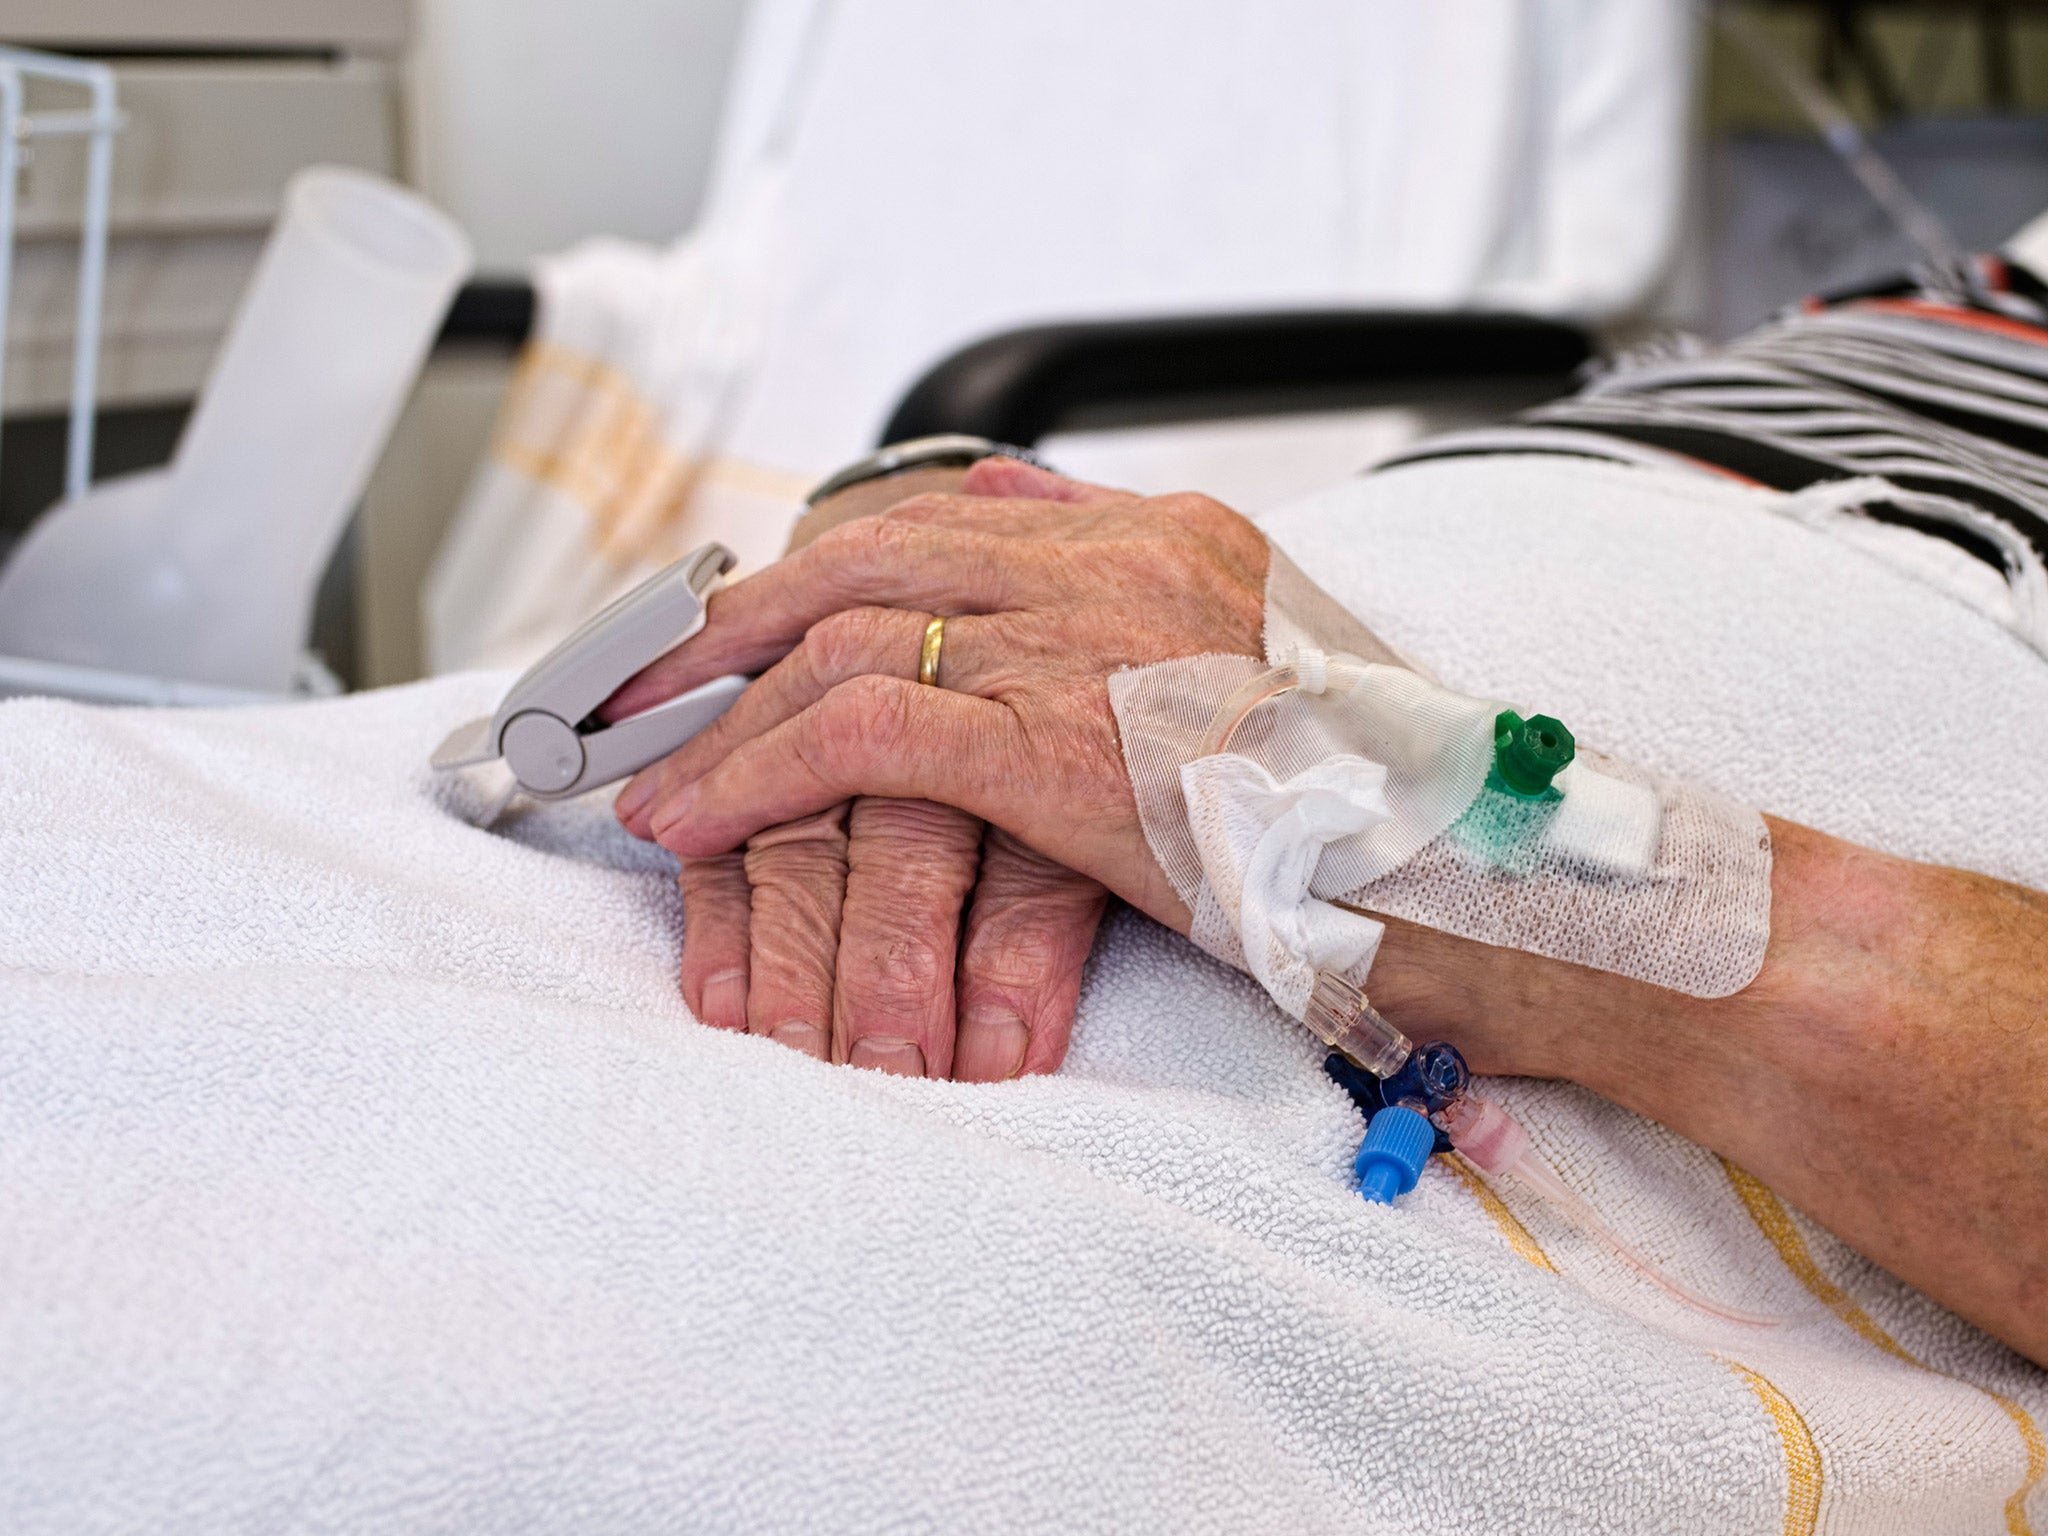 Individualised care plans for dying people should now be created, the guideline states